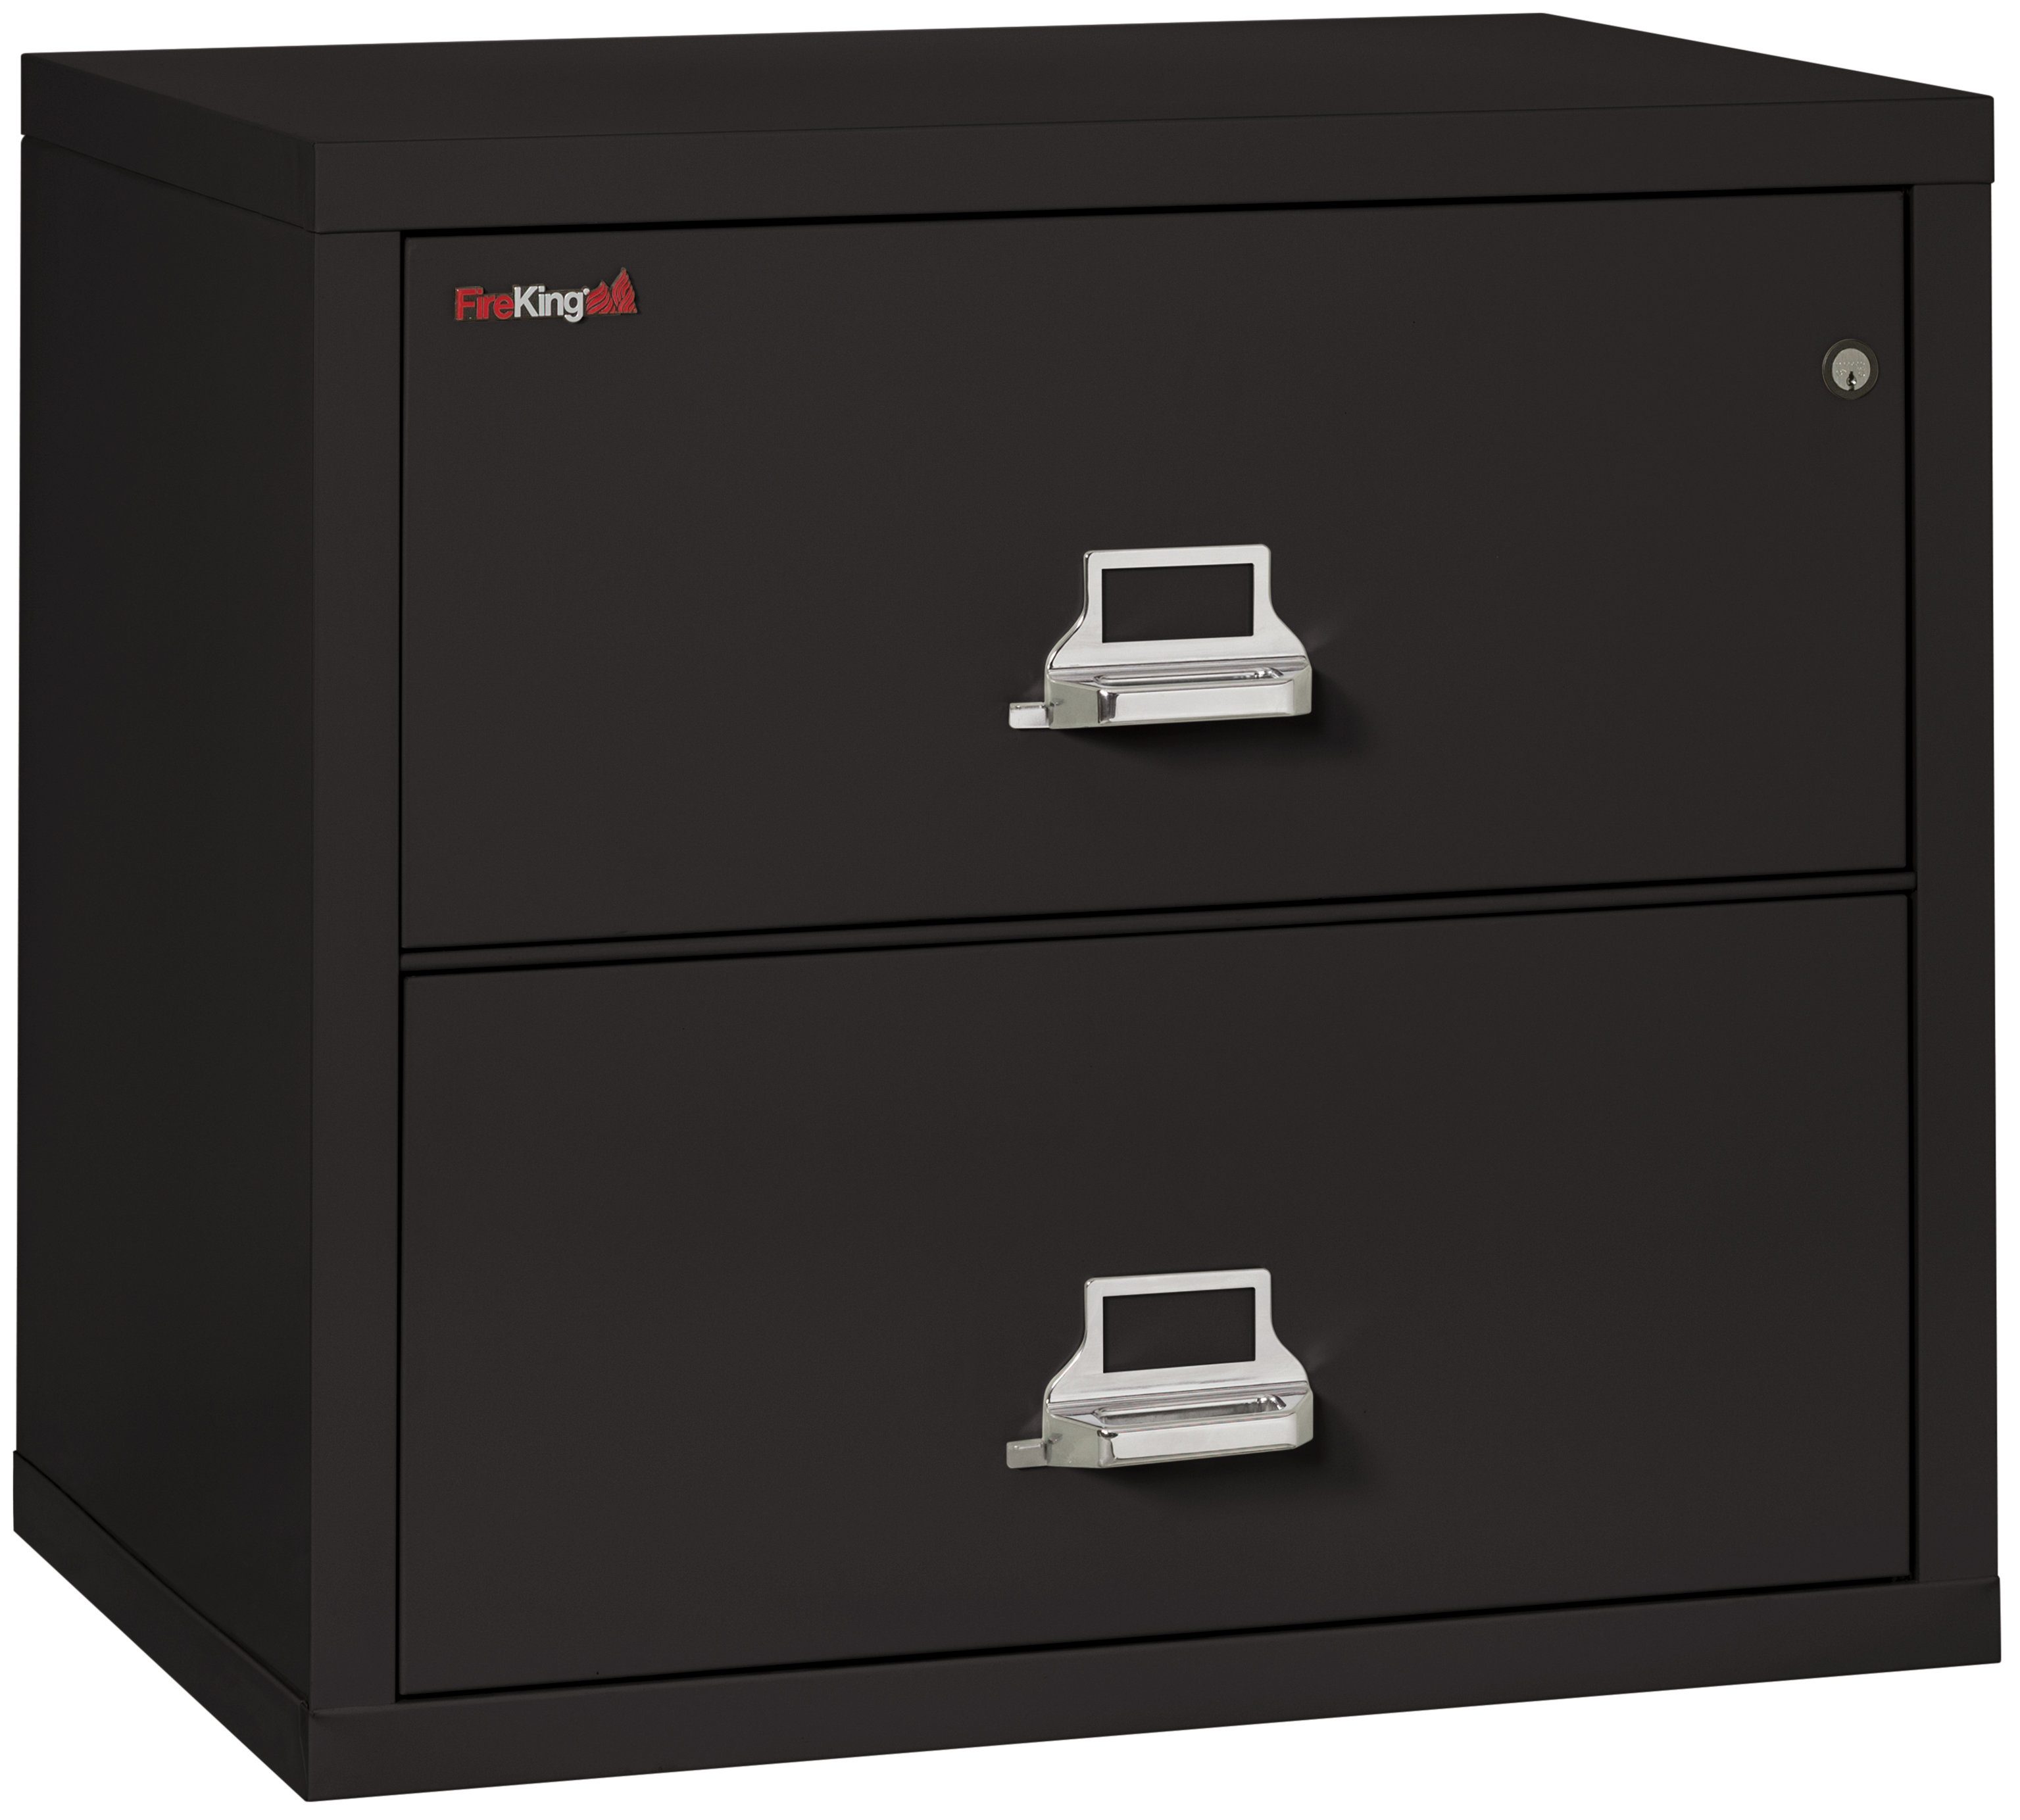 Fireking Fireproof 2 Drawer Lateral File Cabinet Wayfair throughout proportions 3071 X 2767